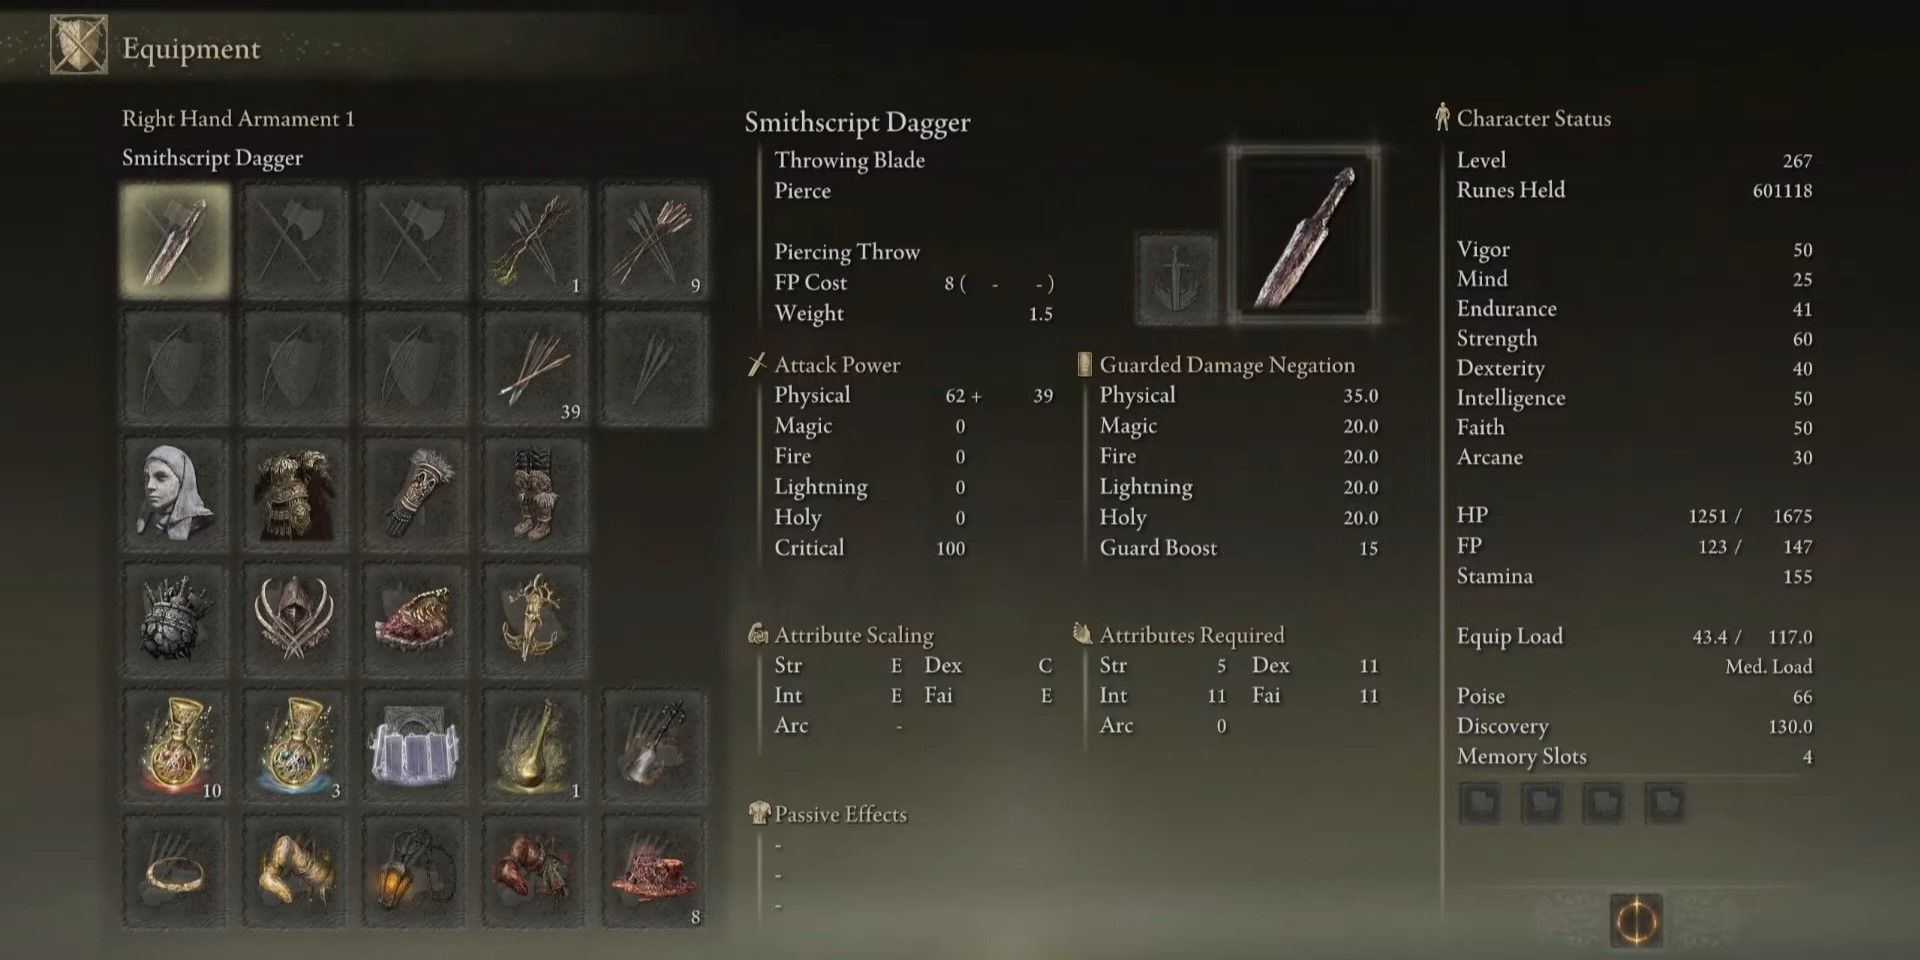 The stats for the Smithscript Dagger in Elden Ring in the menu